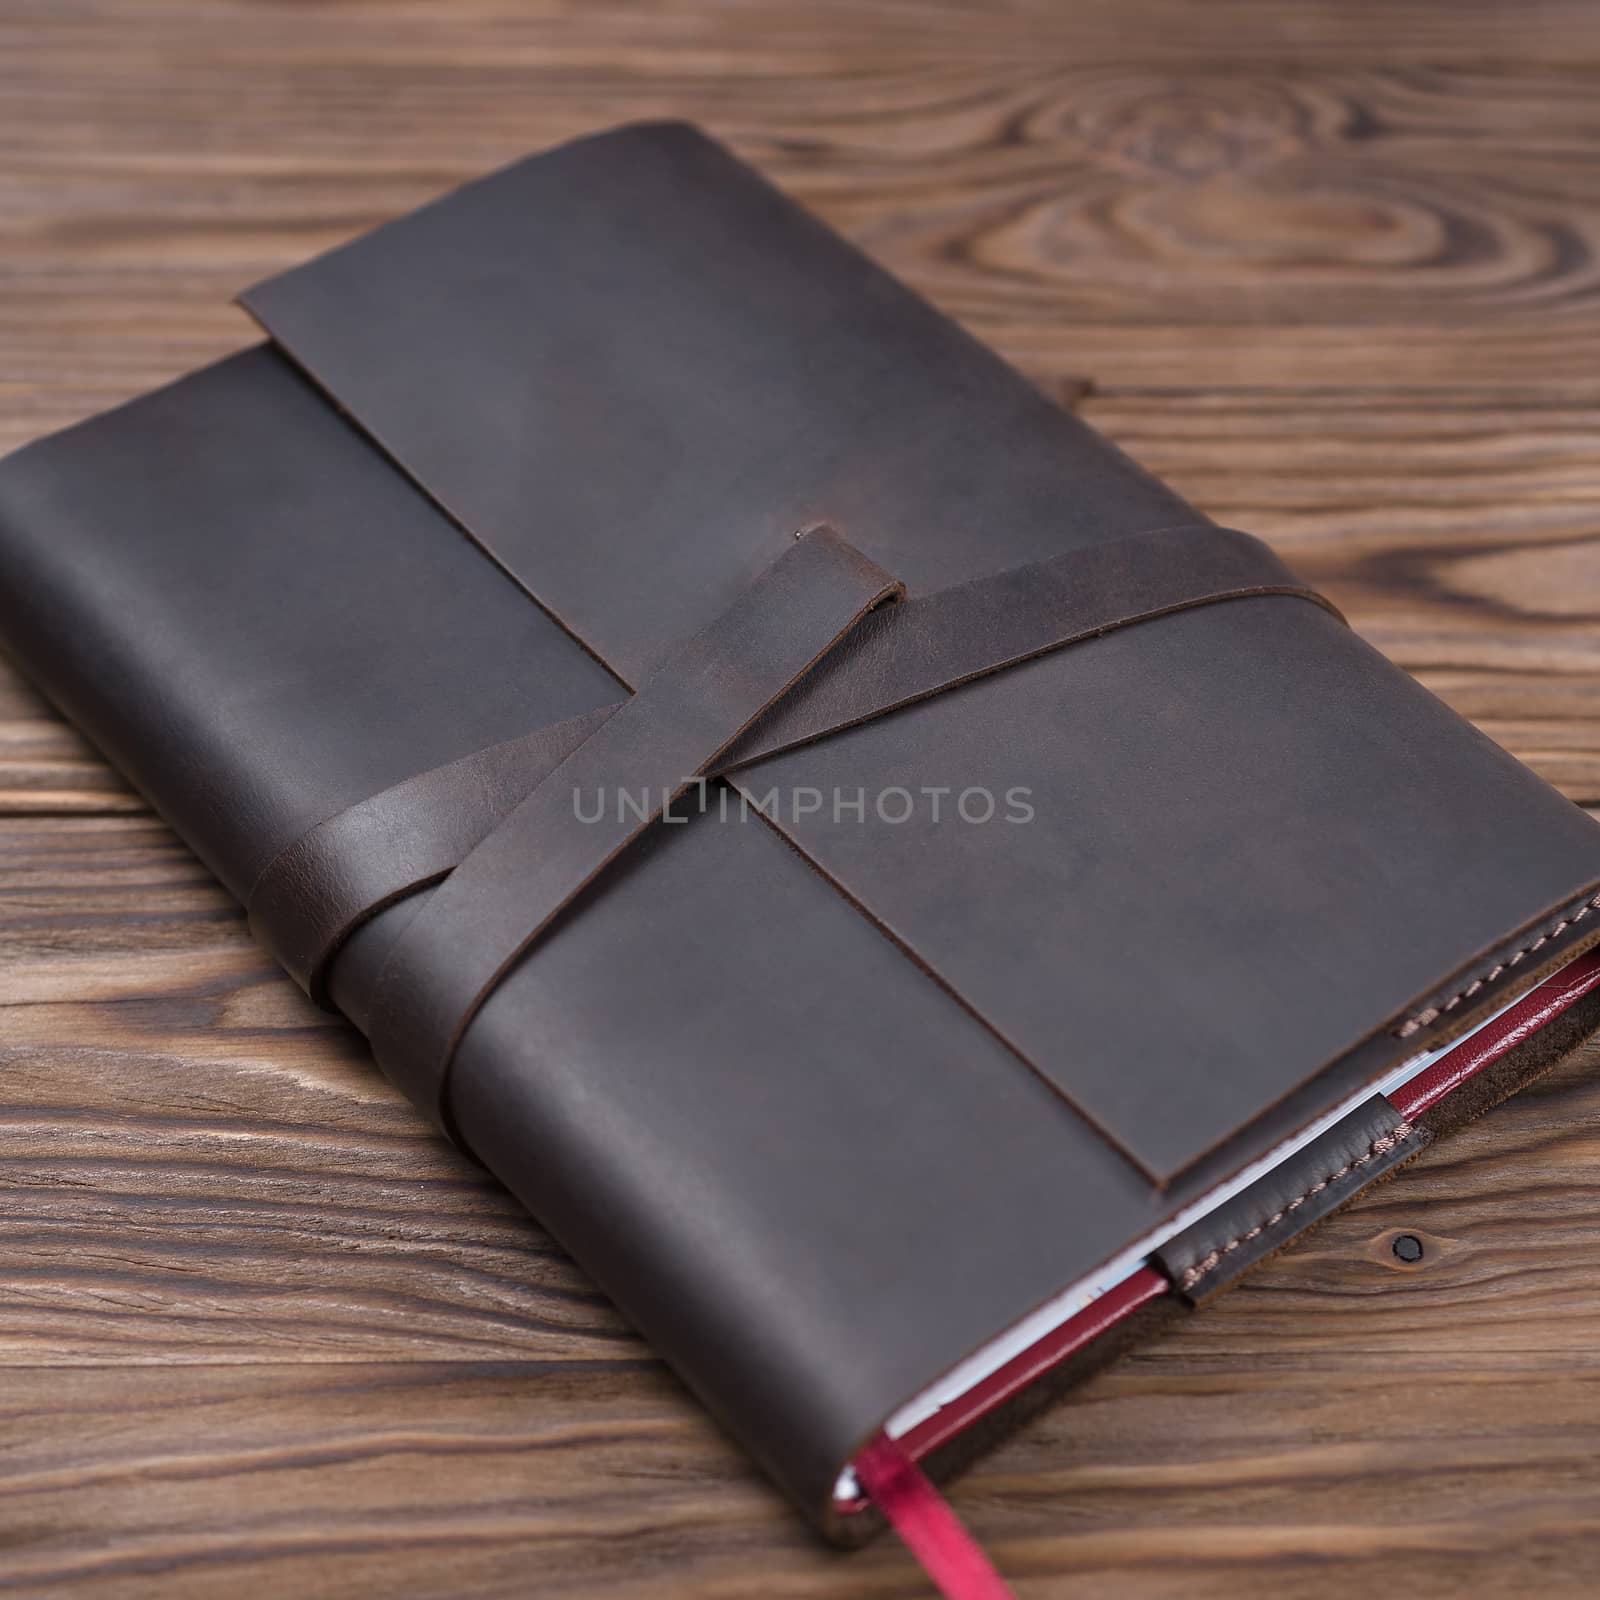 Brown handmade leather notebook cover with notebook inside on wooden background. Stock photo of luxury business accessories.